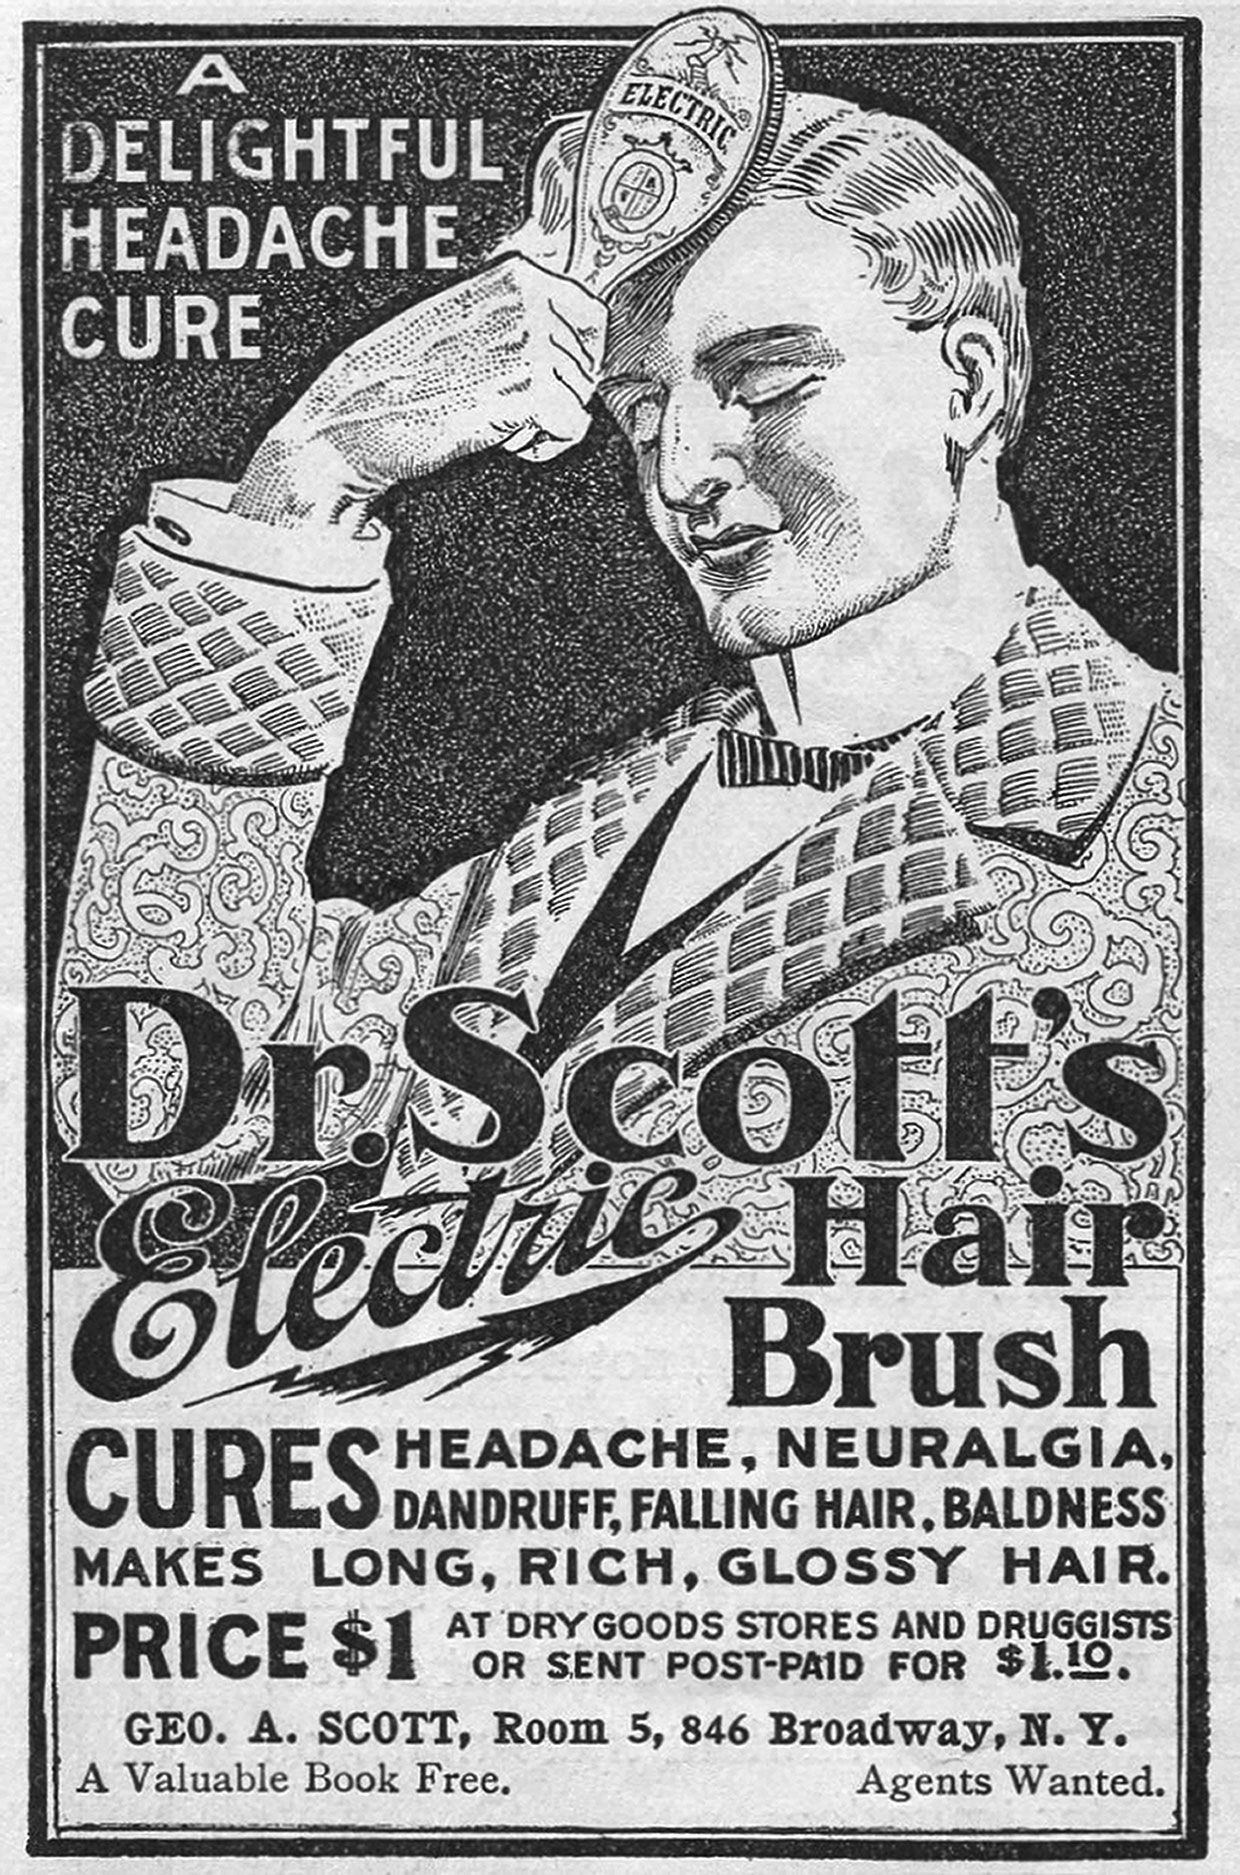 A vintage ad for Dr. Scott's electric hair brush.